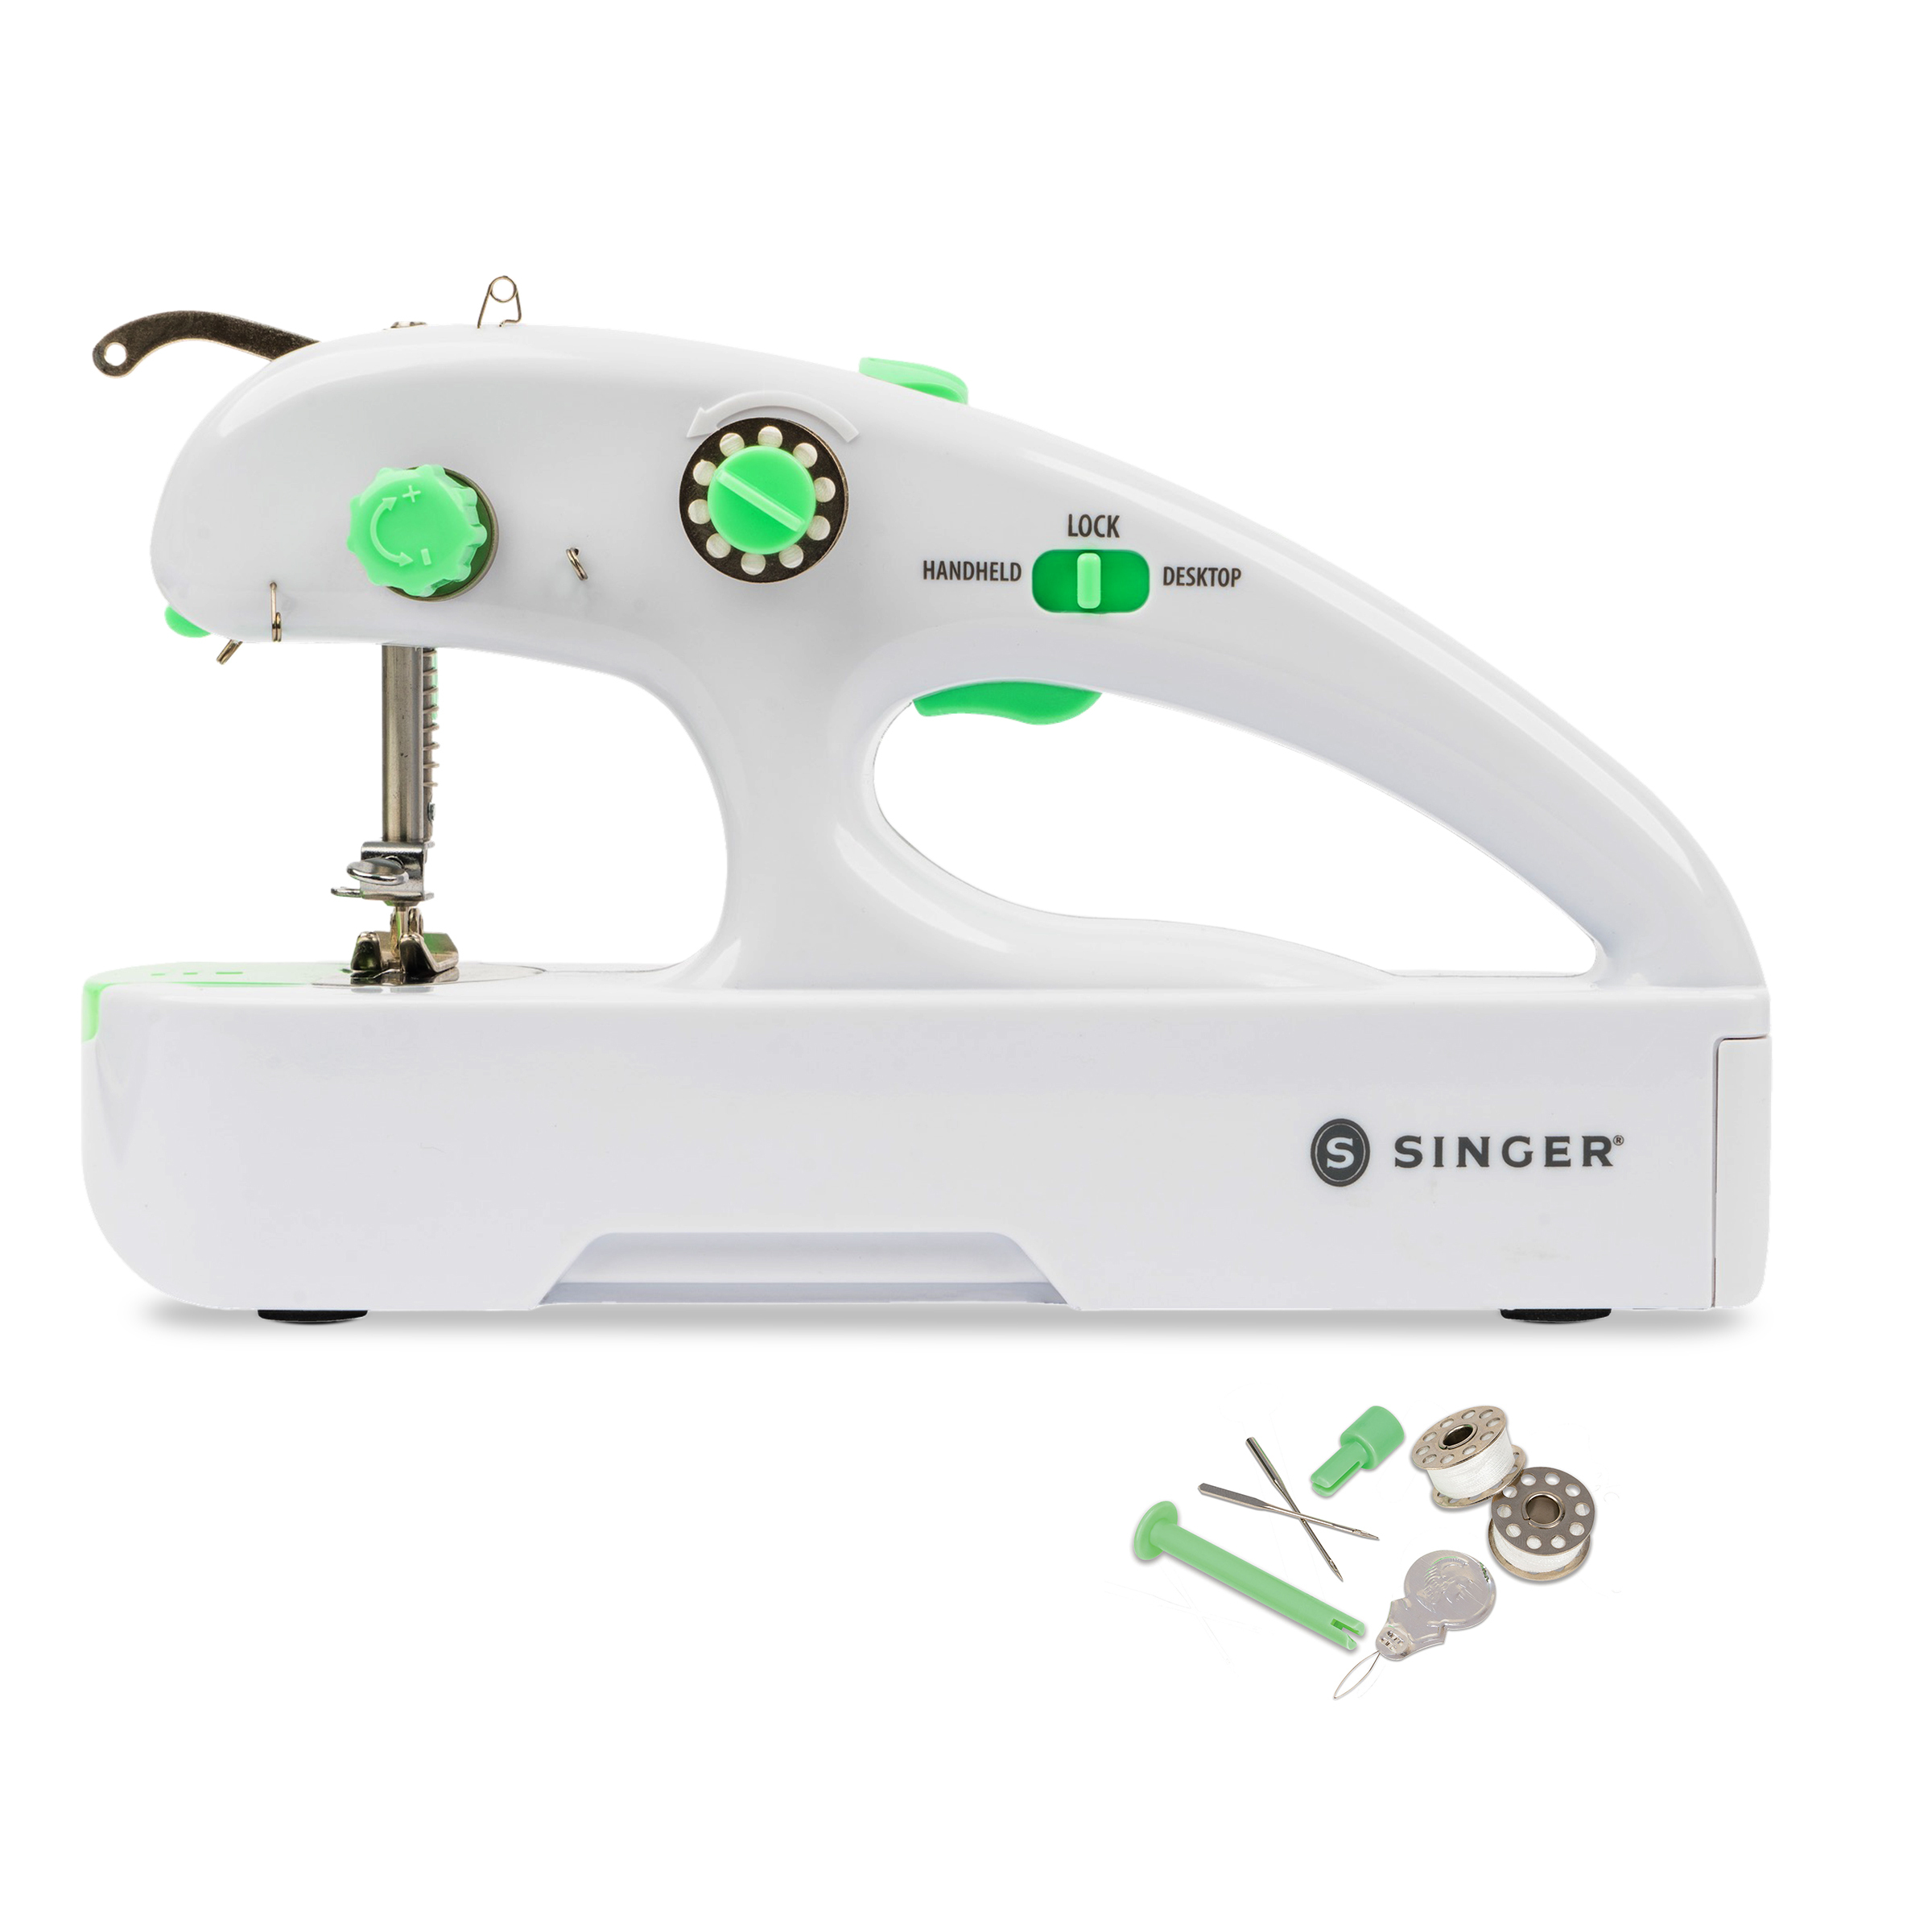 SINGER Stitch Quick Plus Cordless Hand Held Mending Portable Sewing Machine, Two Thread - image 1 of 14